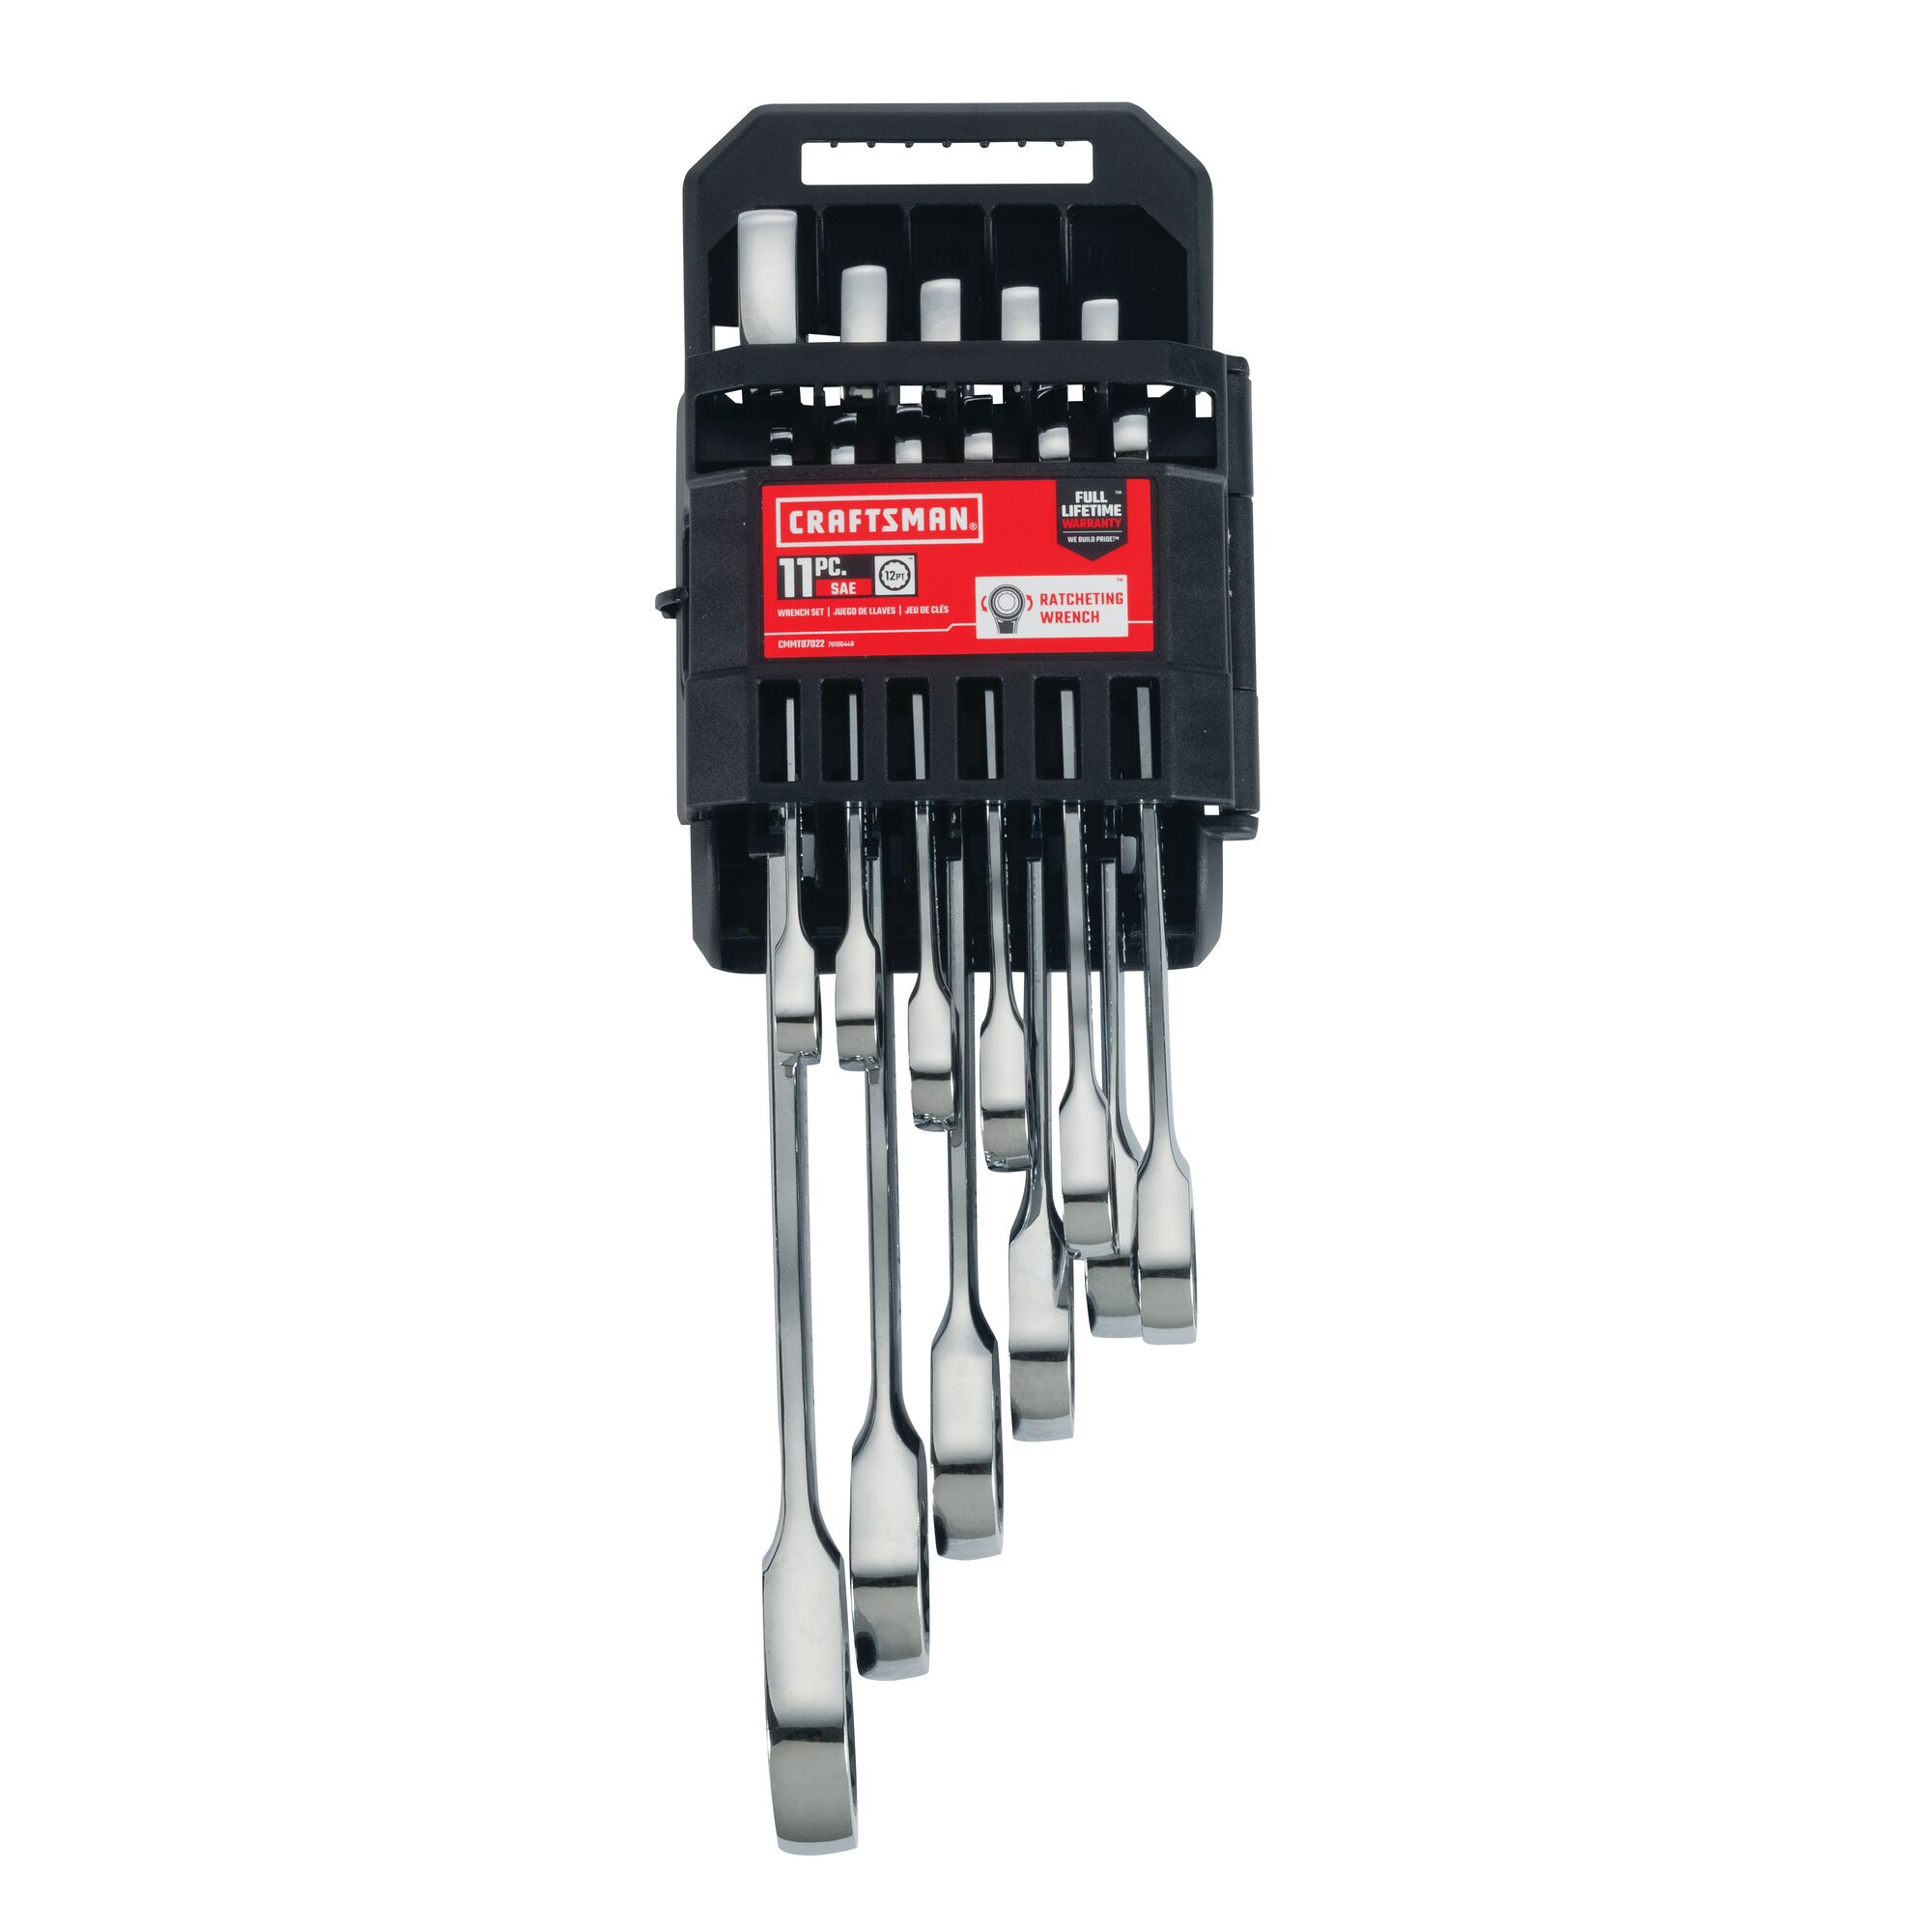 11 piece S A E ratcheting combination wrench set in packaging.